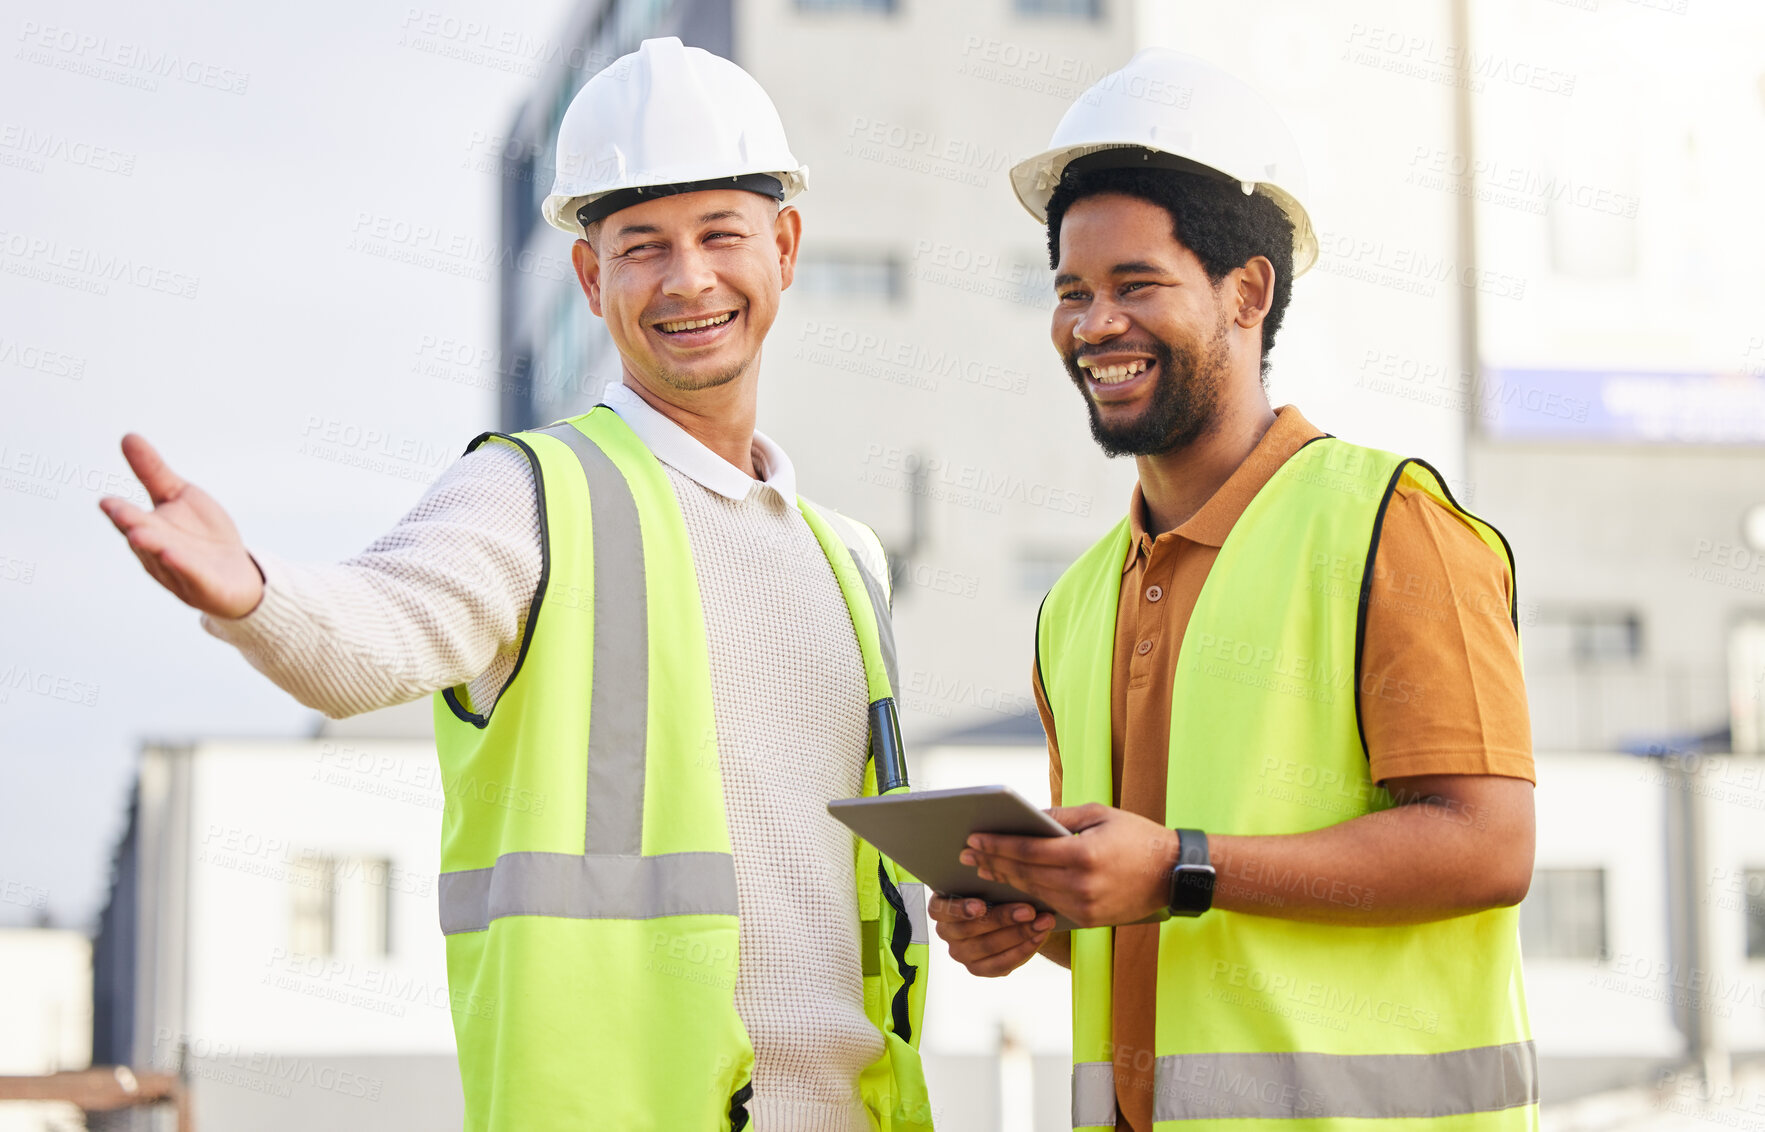 Buy stock photo Tablet, collaboration or architecture with an engineer man and designer planning on a construction site. Architect, building and teamwork with men working together to design a development project